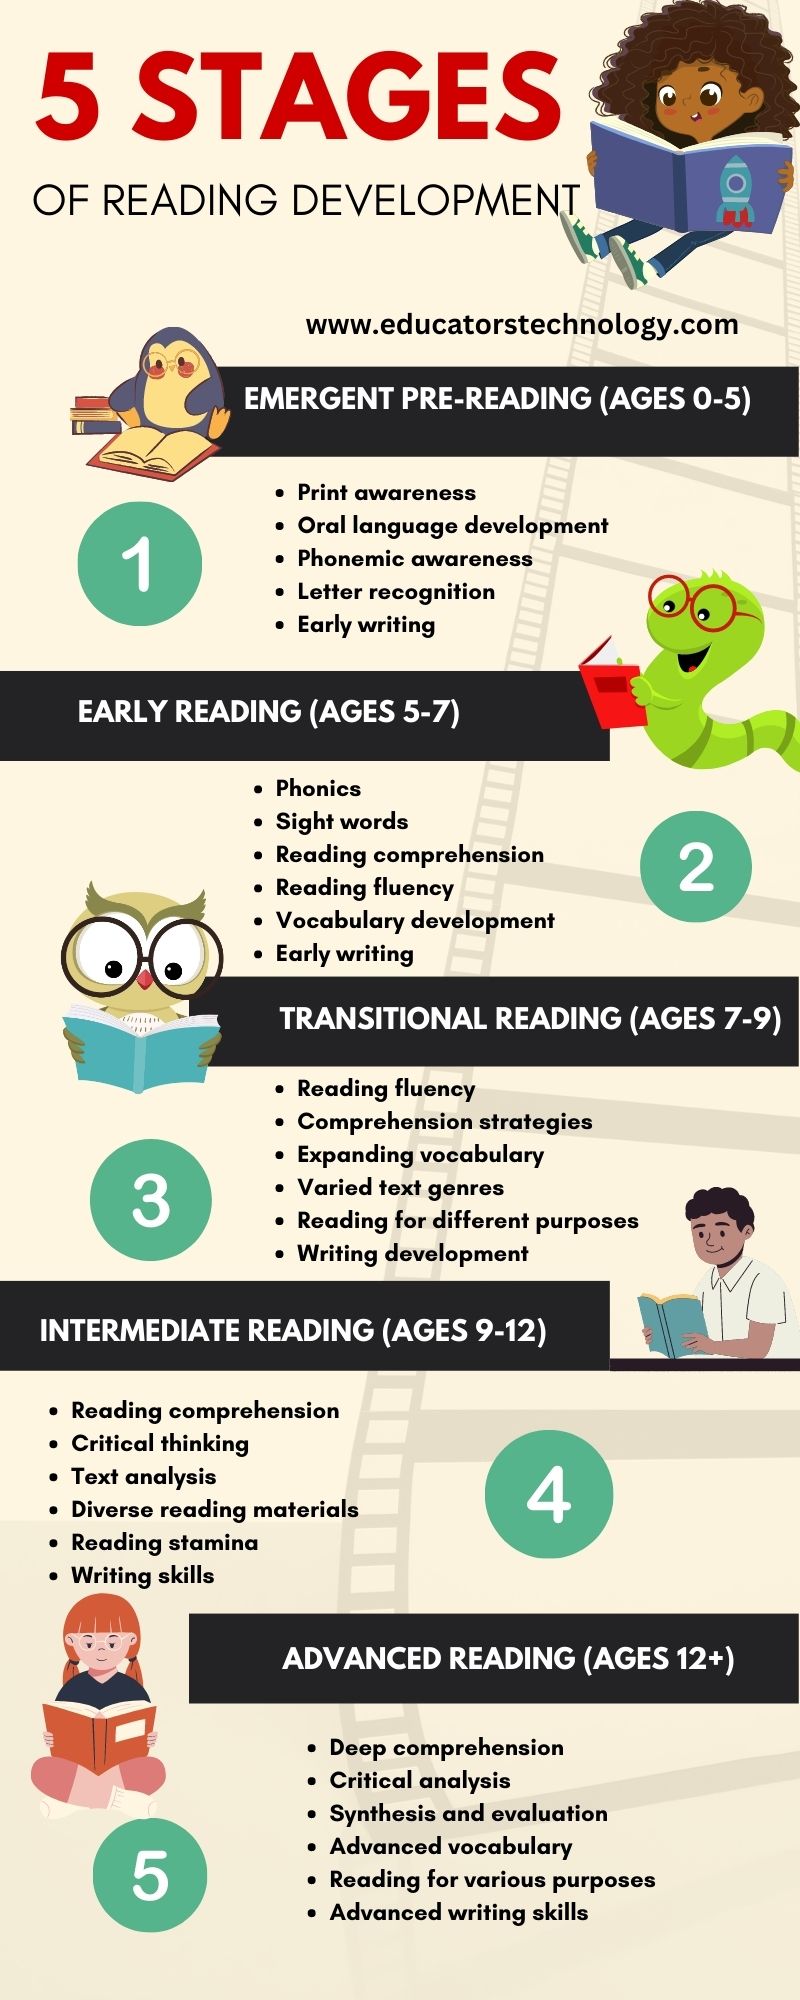 The 5 Stages of Reading Development - Educators Technology